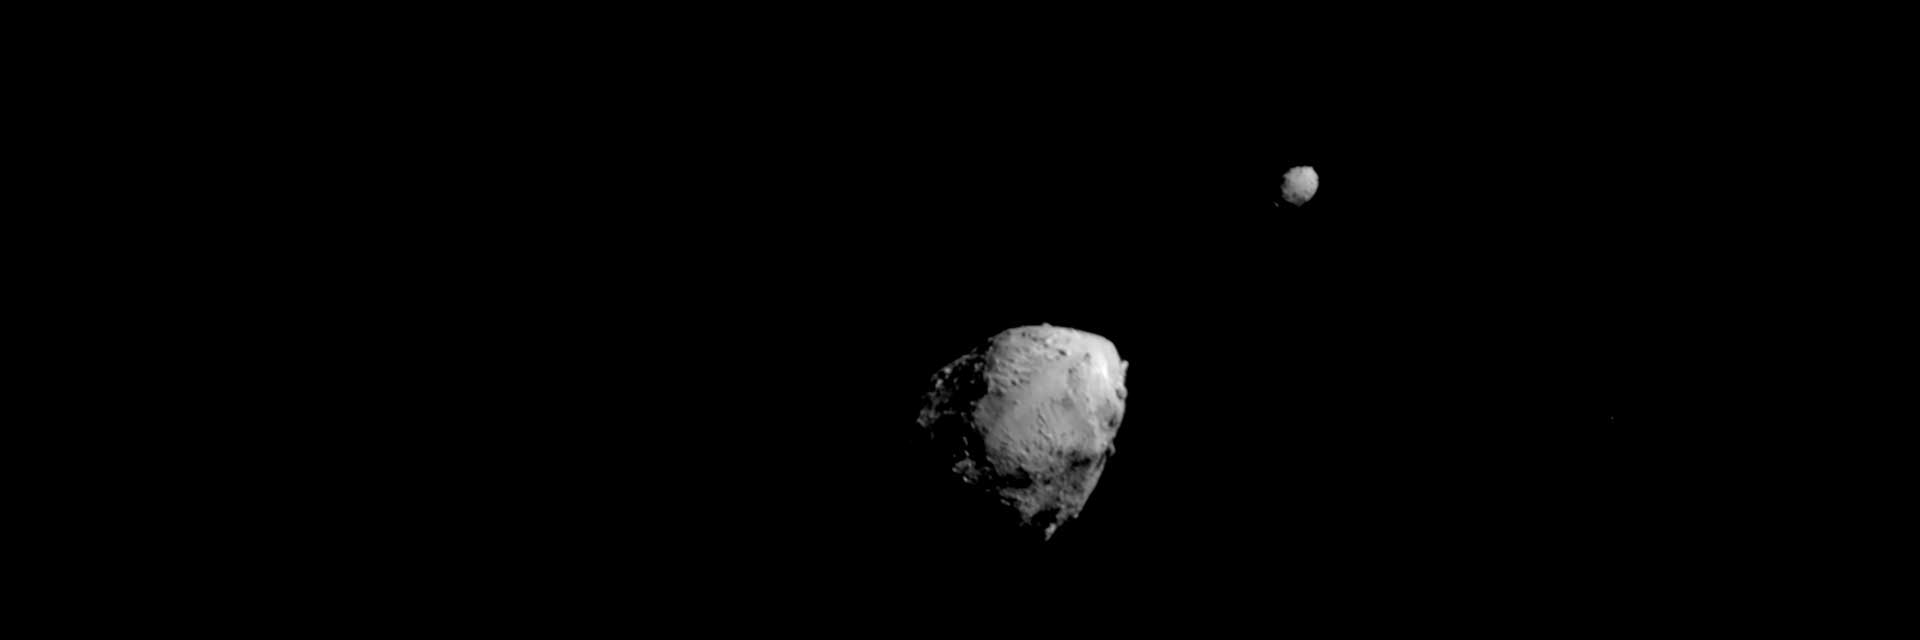 Two asteroids in space